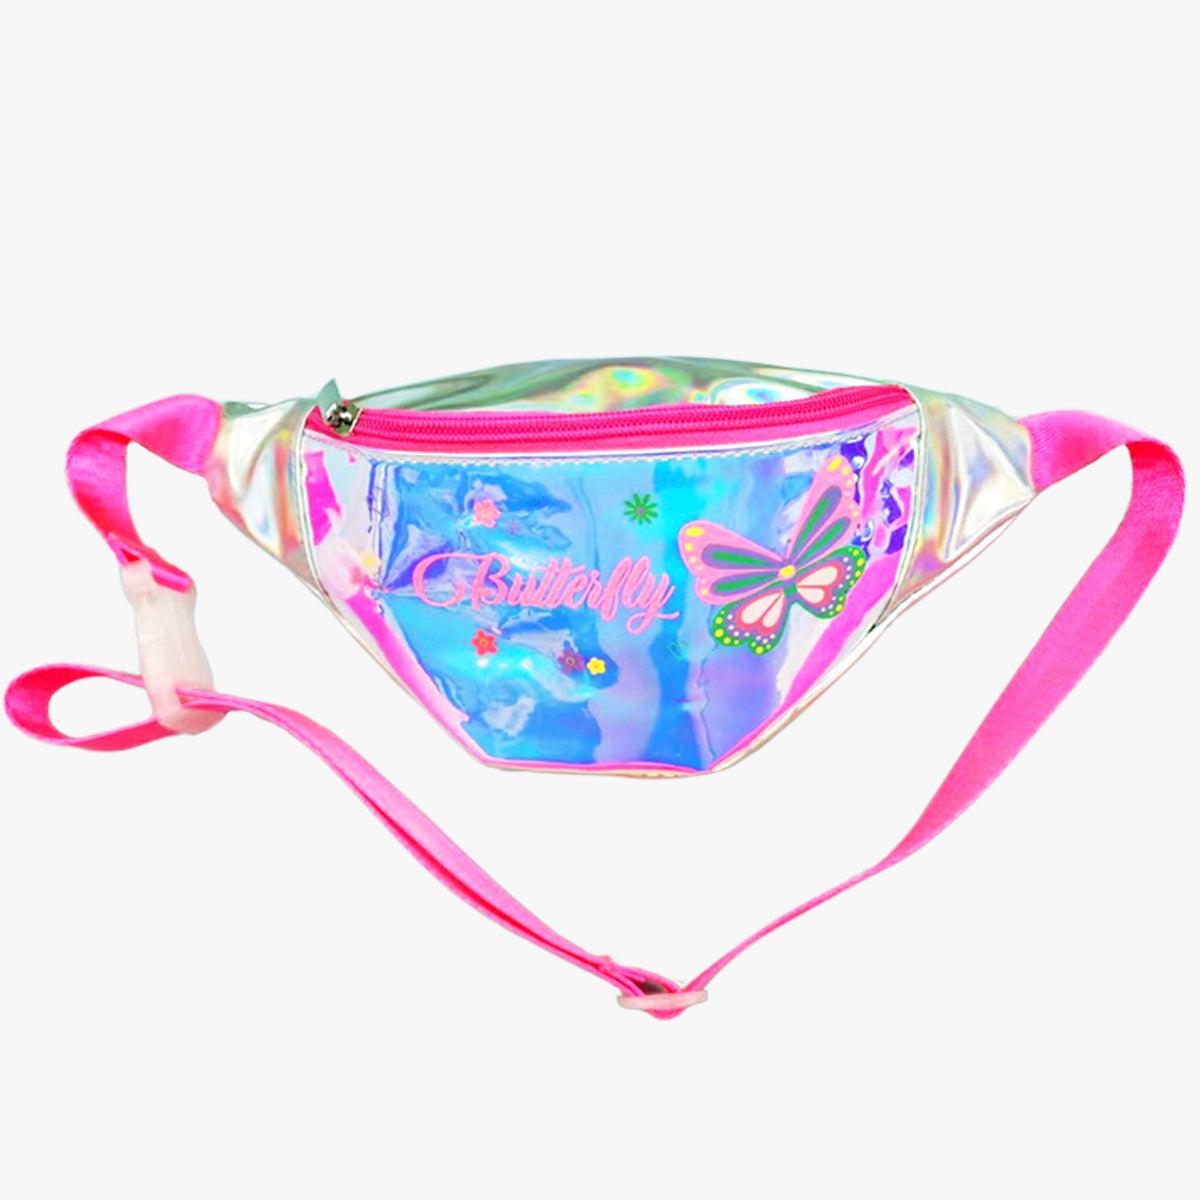 Pink Strap Butterfly Kidcore Waist Bag - Aesthetic Clothes Shop